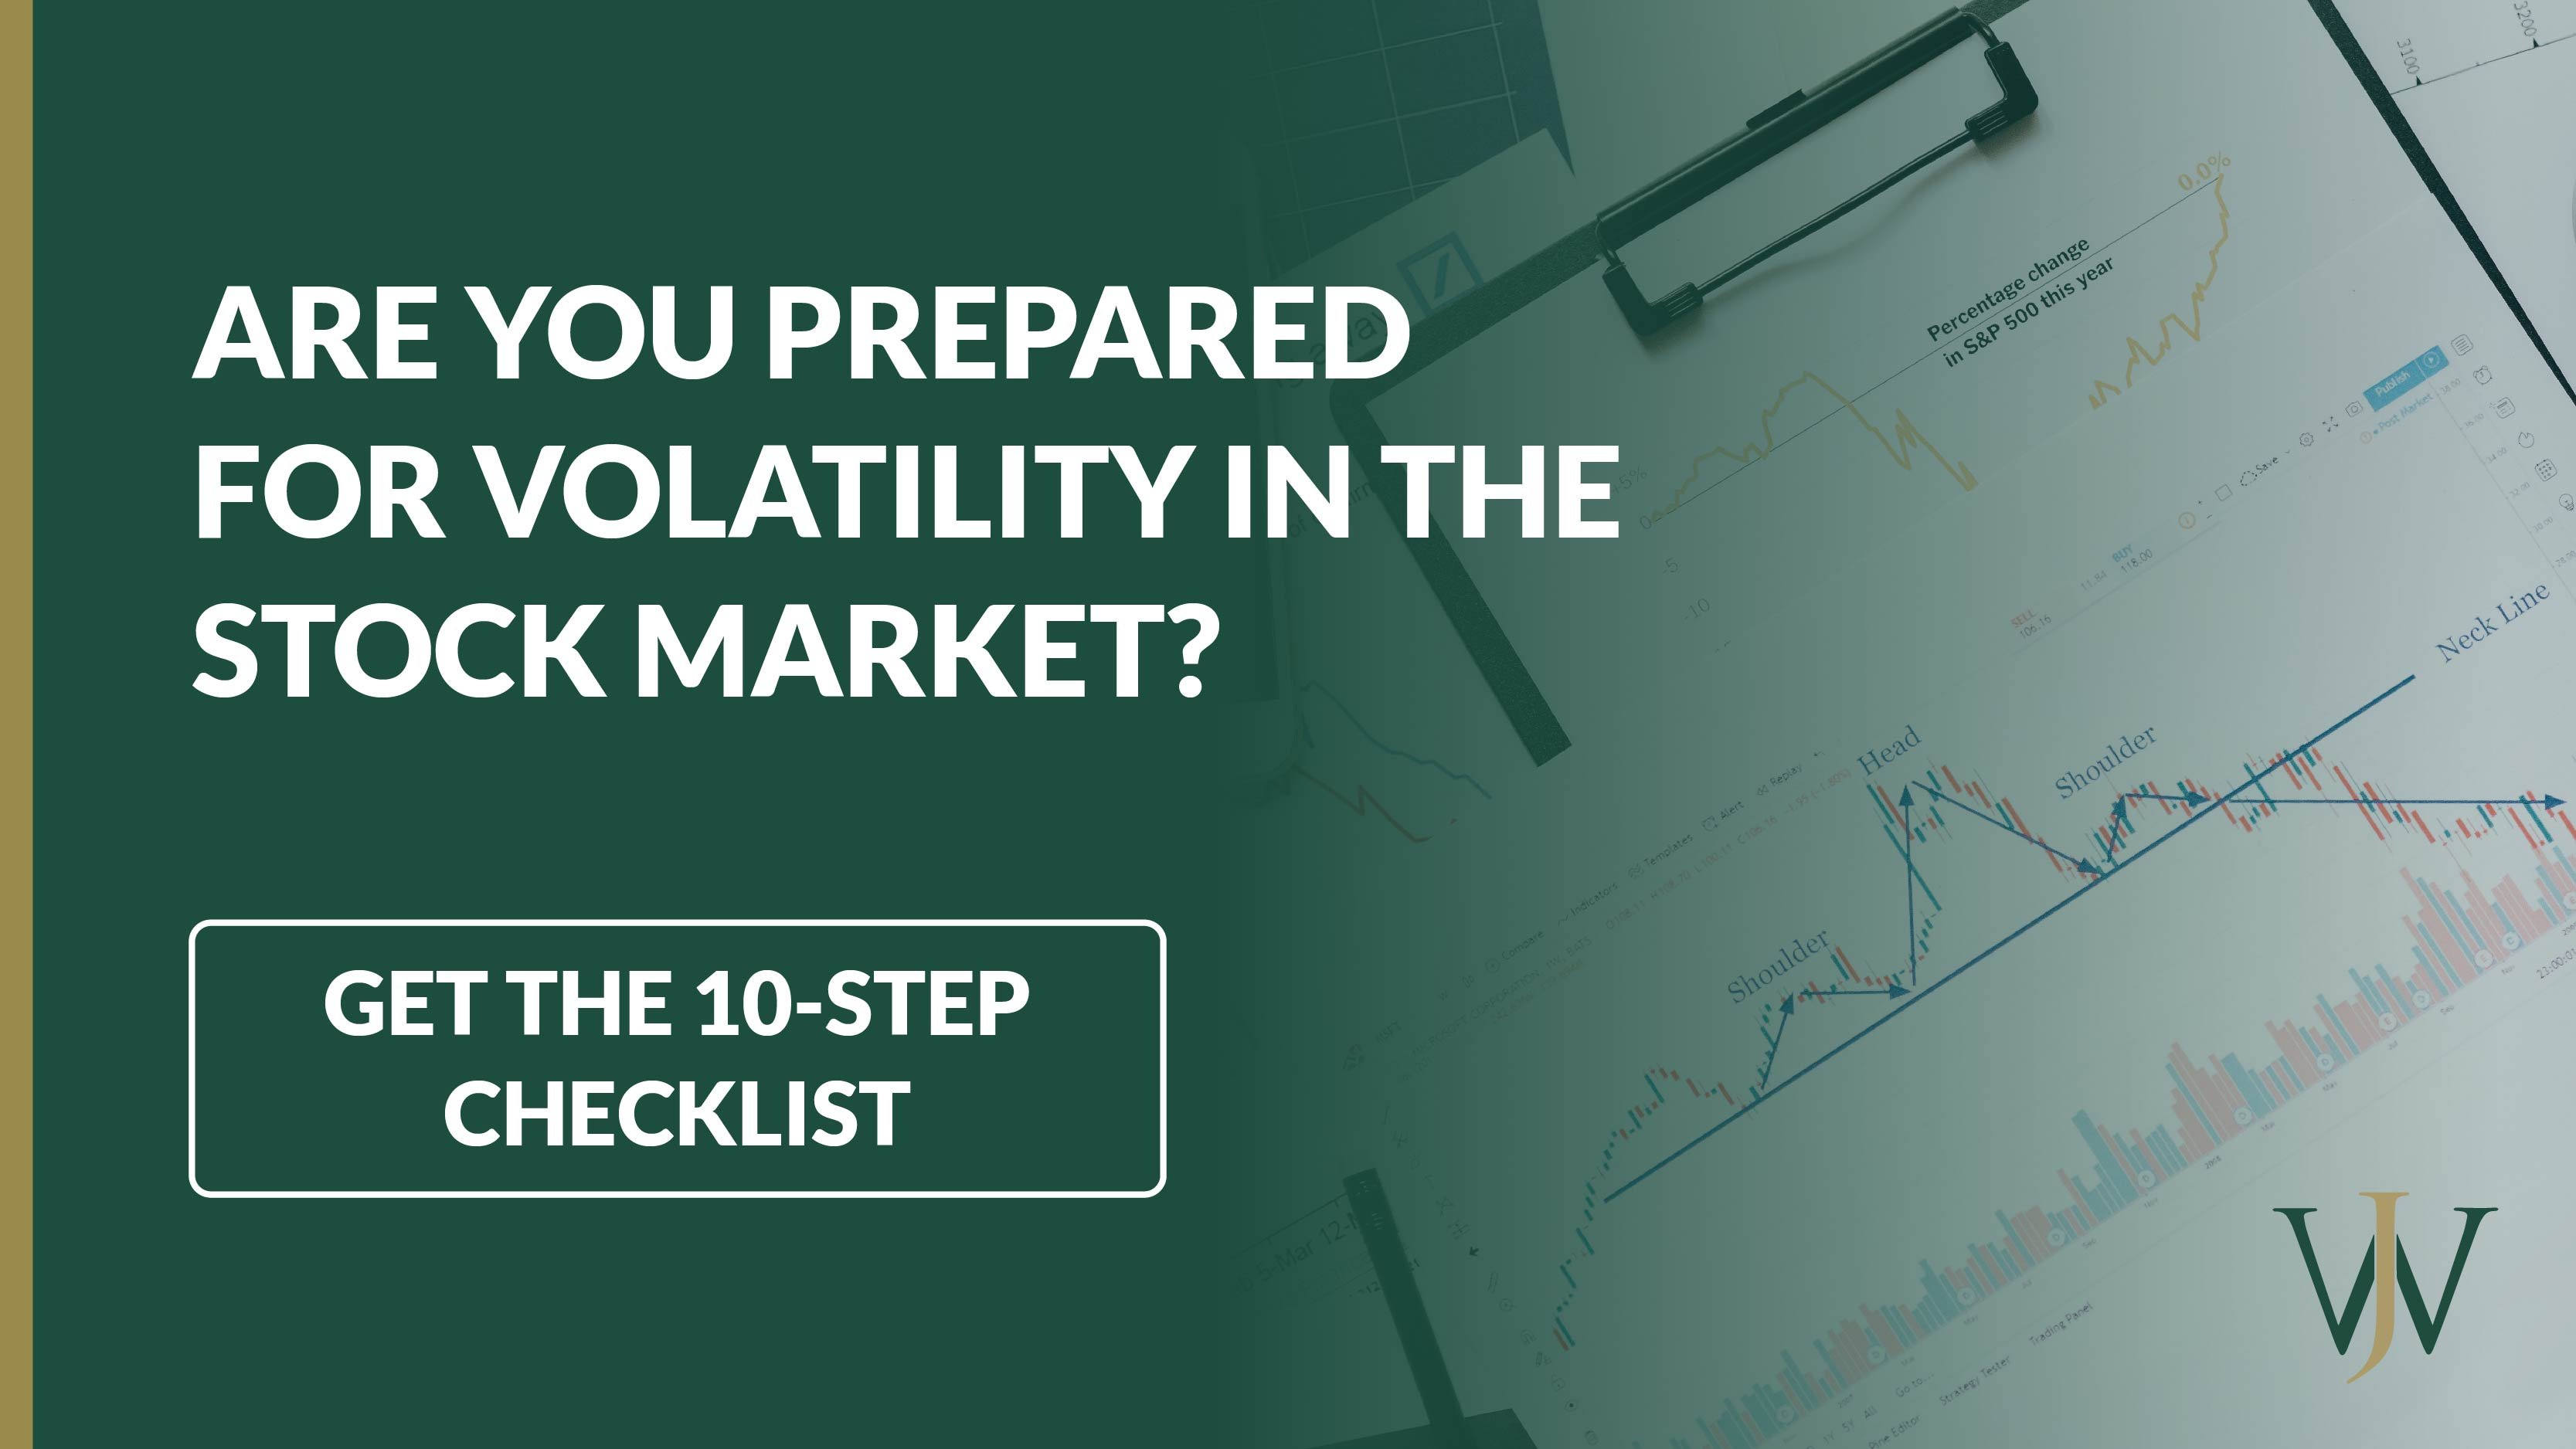 Lead Gen - Investments _WJA _LinkedIn_2022_9_1600x900_Are you prepared for volatility in ste stock market - 10 step Checklist